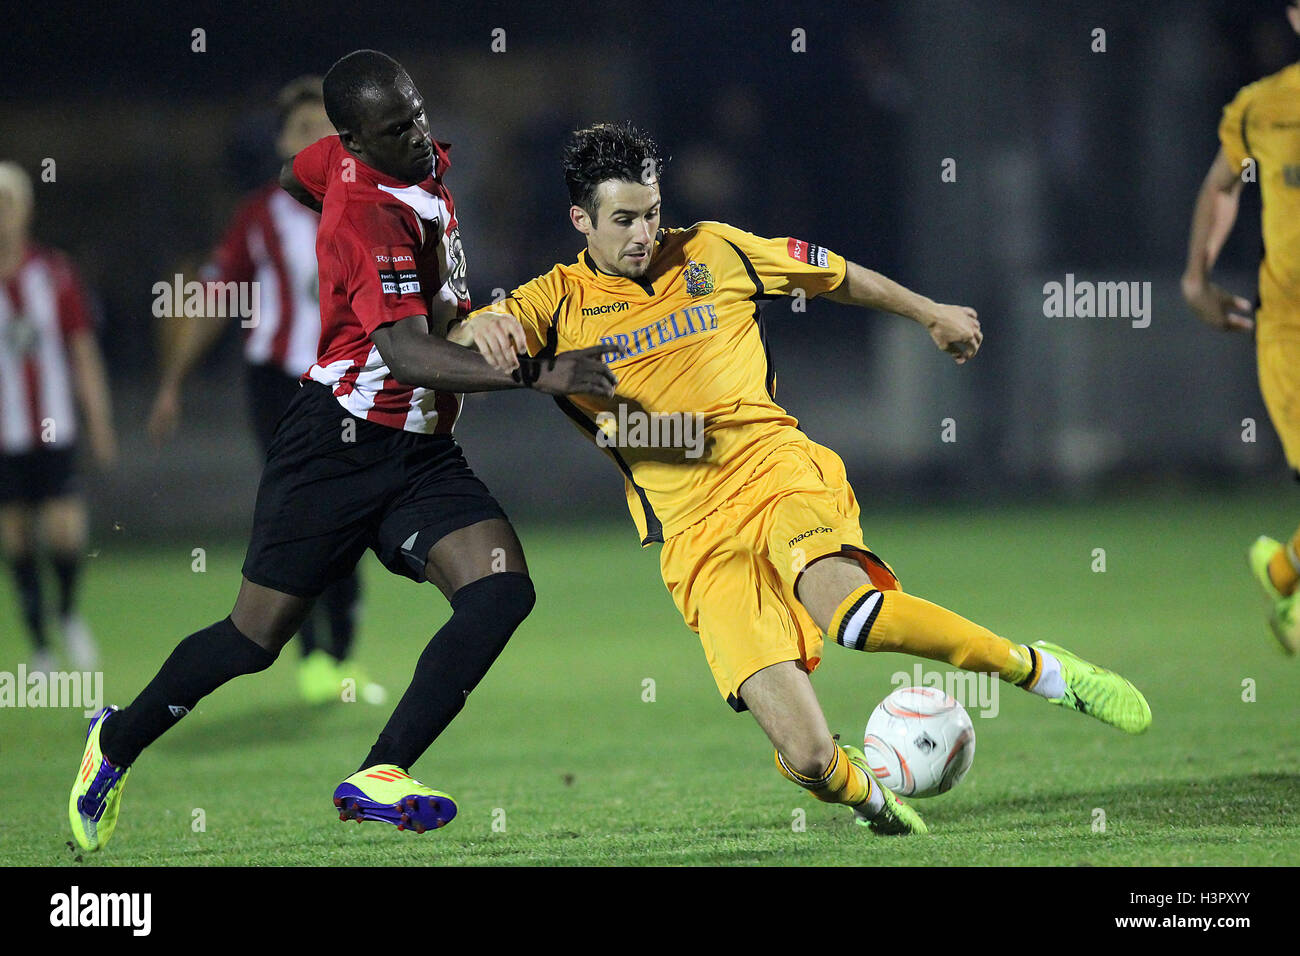 Tom Mills of Maidstone holds off Tobi Joseph of Hornchurch - AFC Hornchurch  vs Maidstone United - Ryman League Premier Division Football at Mill Field,  Aveley FC, Aveley, Essex - 02/09/14 Stock Photo - Alamy